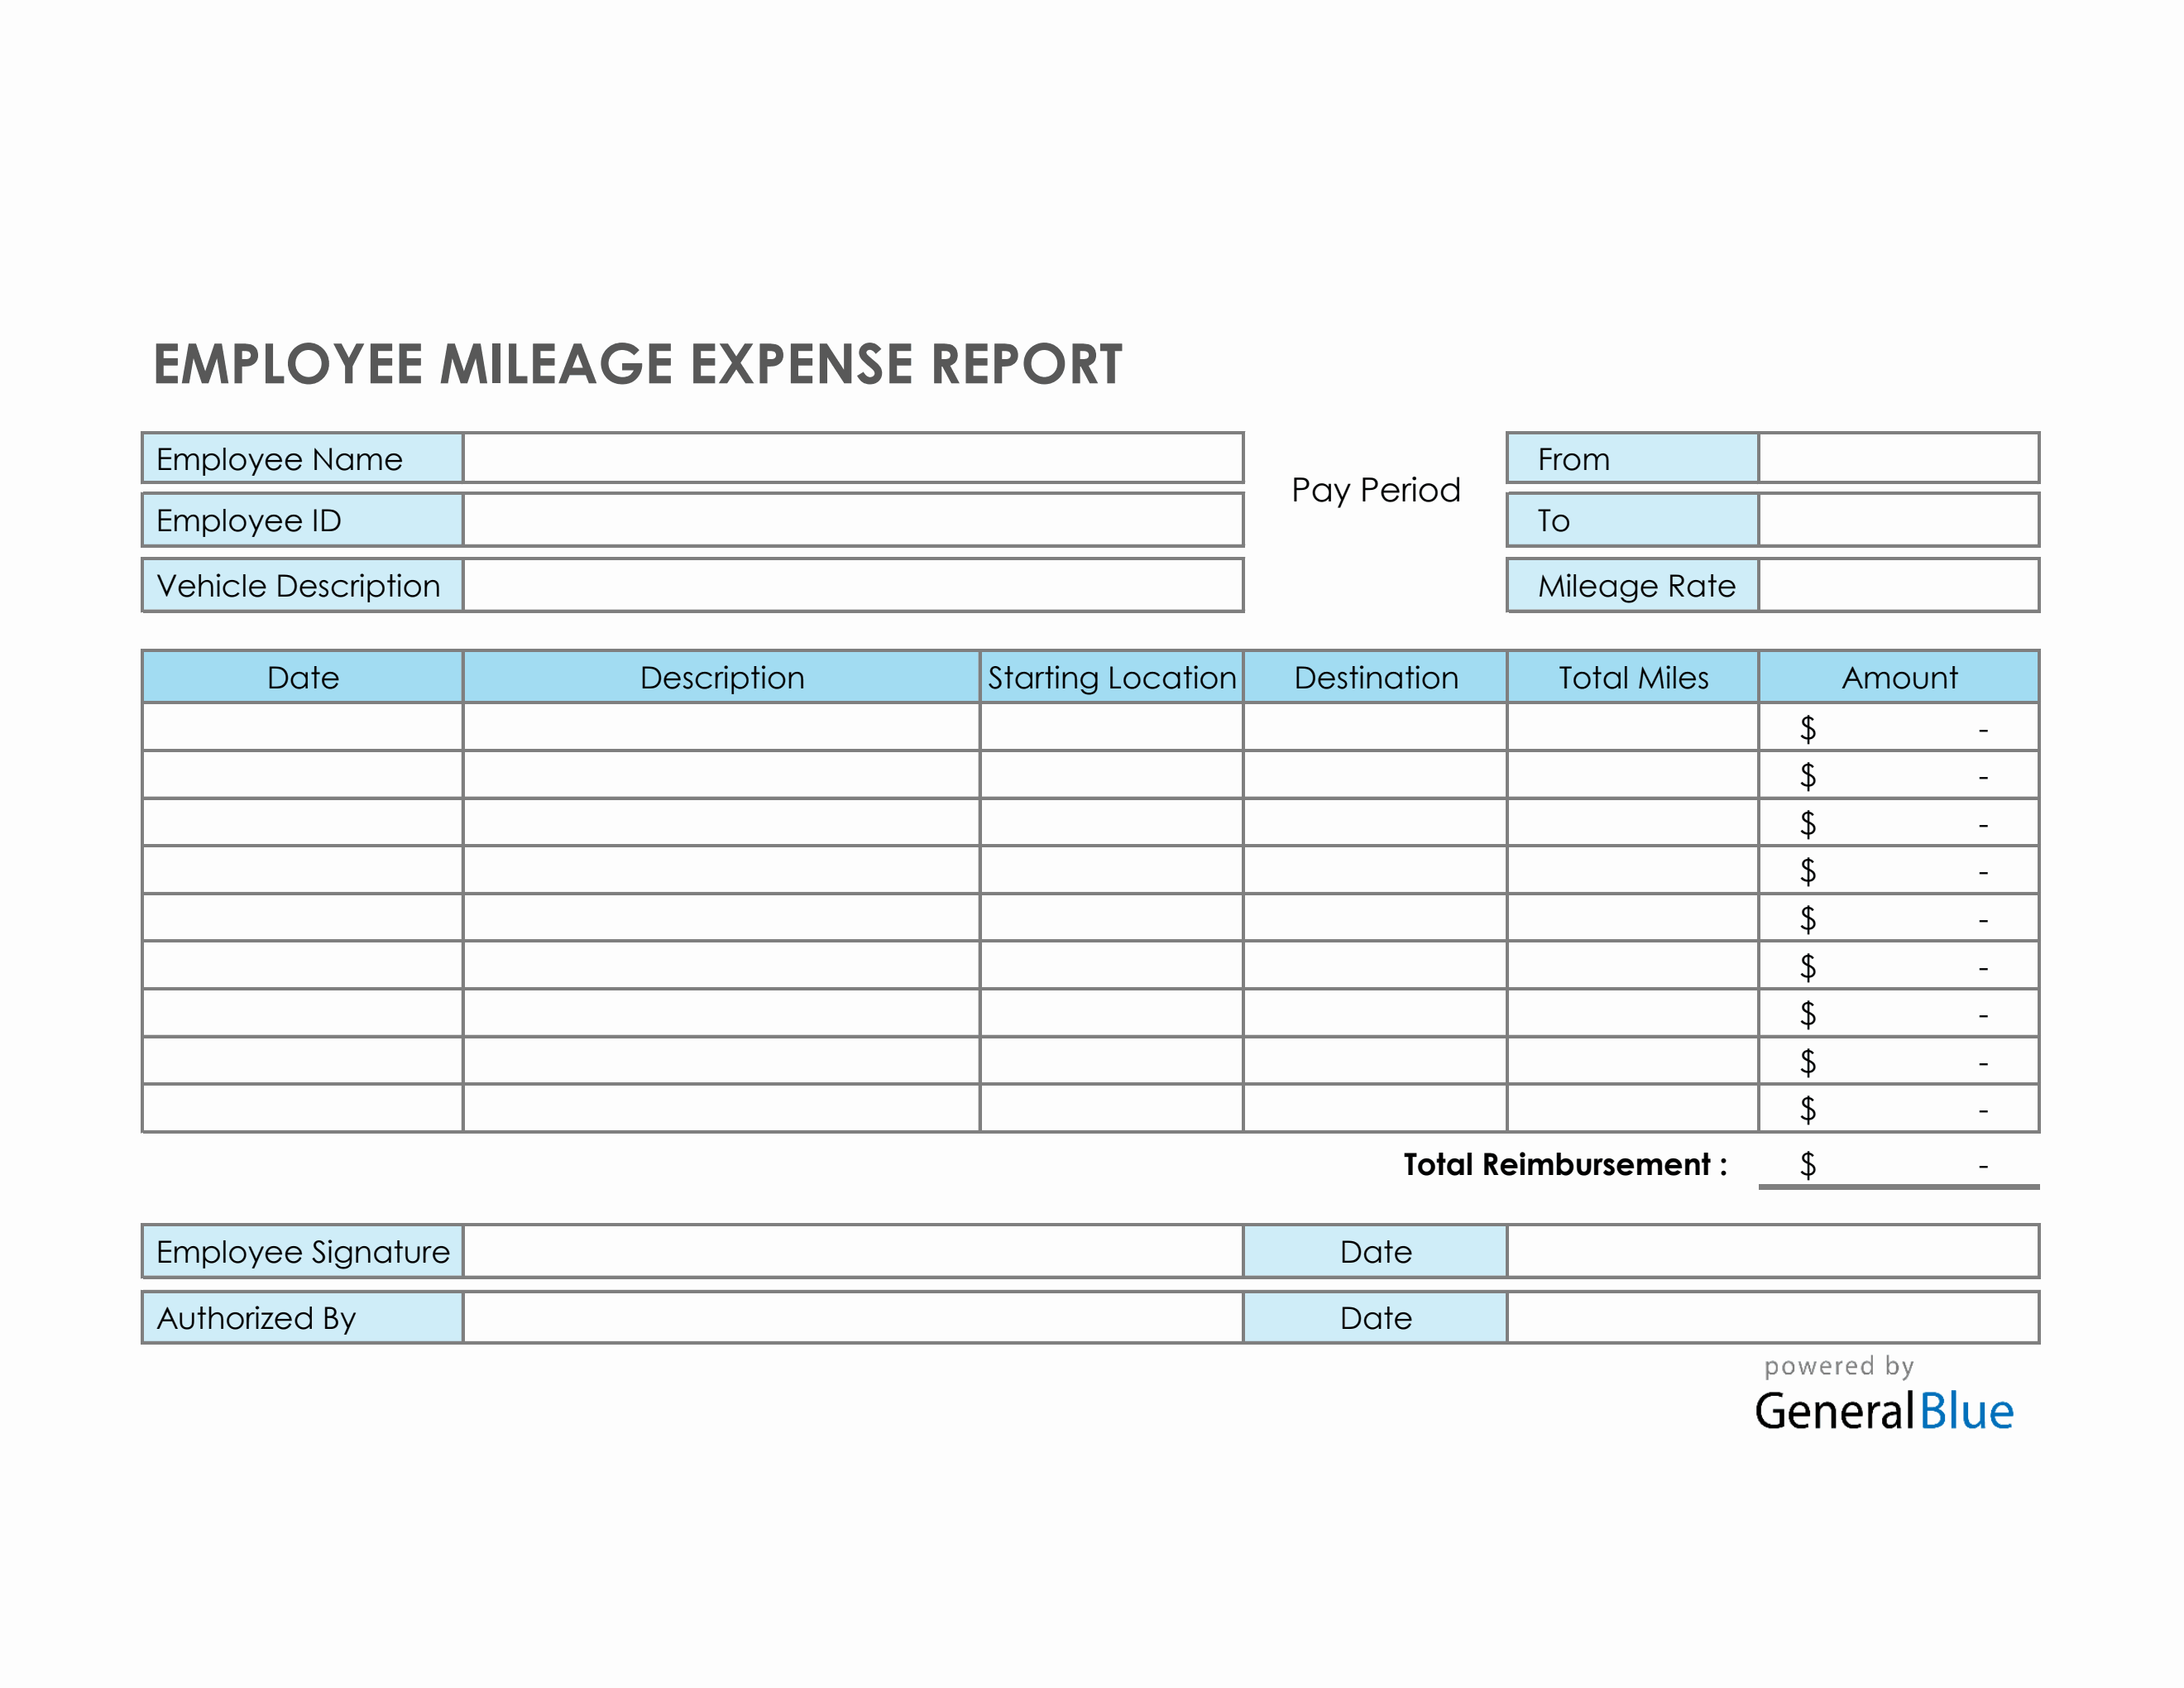 Employee Mileage Expense Report Template in Excel Within Mileage Report Template